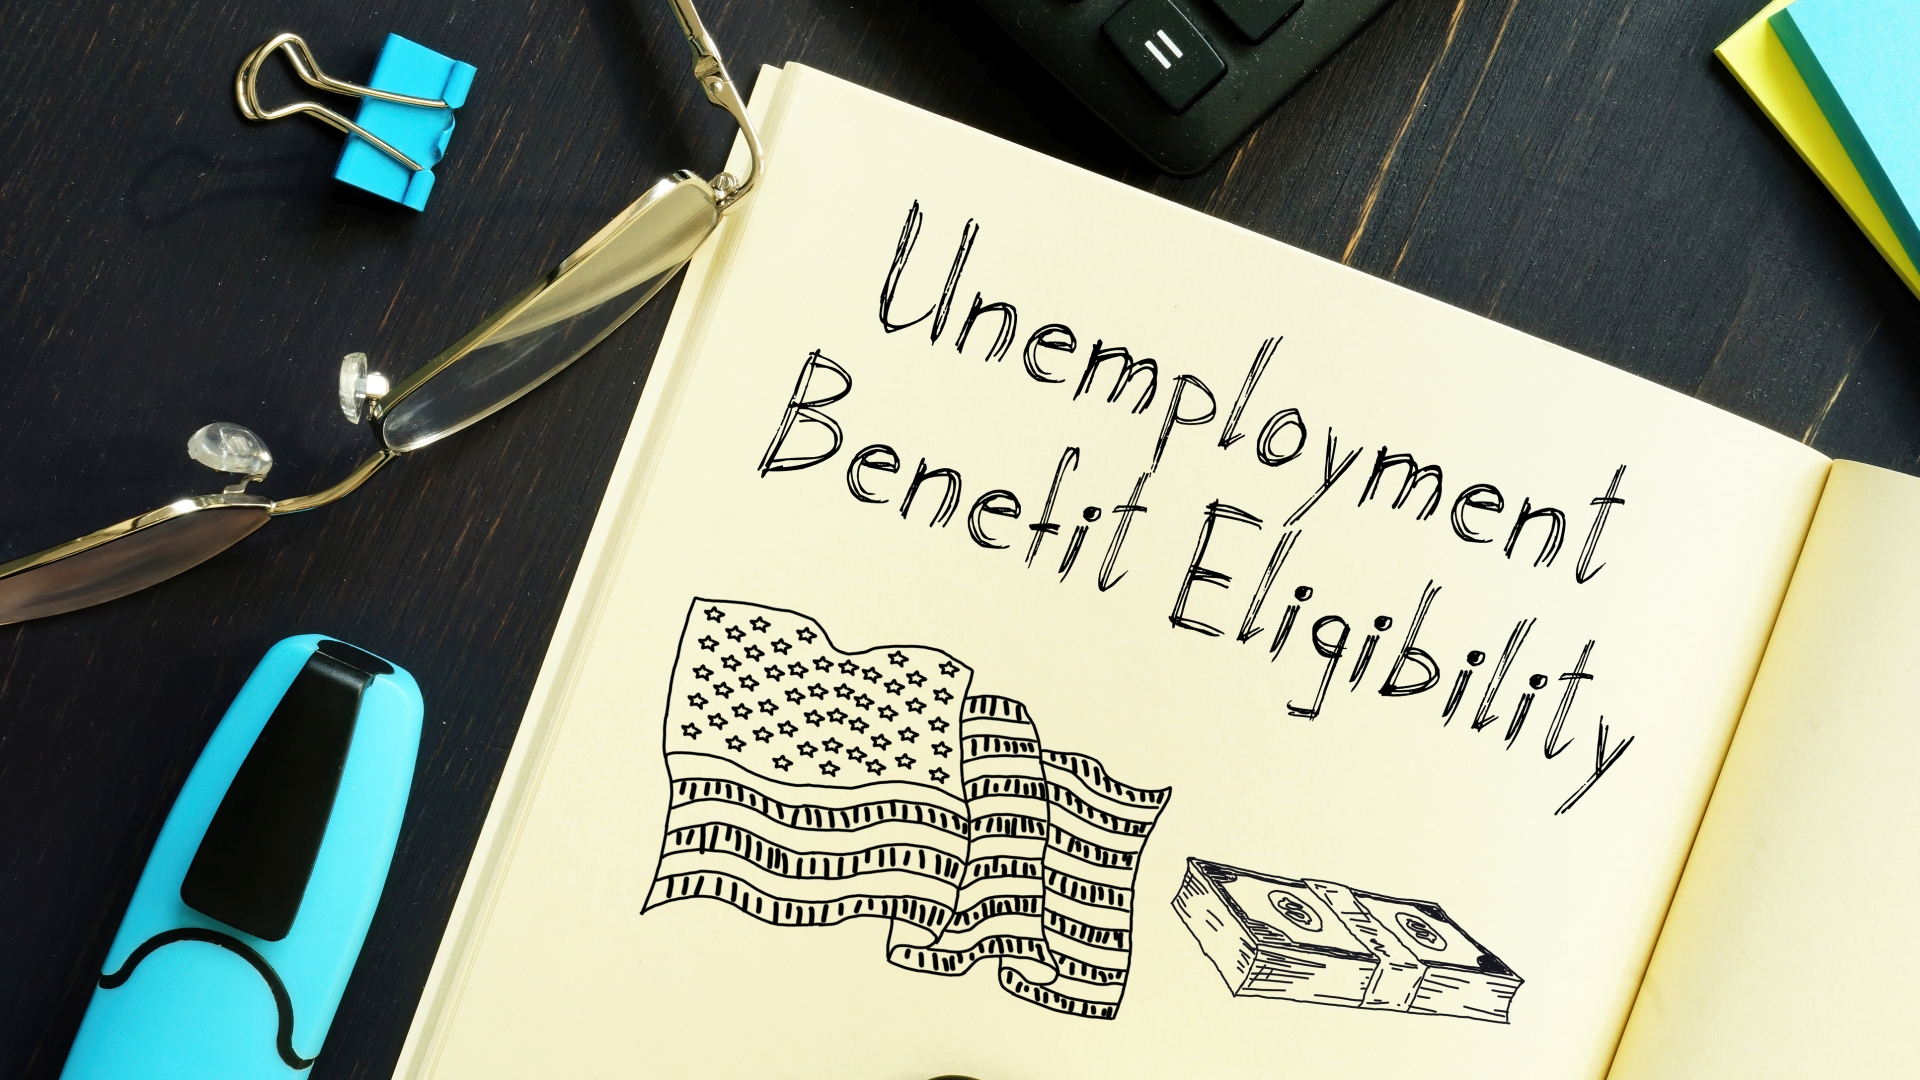 <p>If you received unemployment benefits in 2023, it's important to know your reporting obligations. Review IRS <a href="https://www.irs.gov/taxtopics/tc418" rel="noreferrer noopener">Topic No. 418</a>, which explains the tax treatment of unemployment compensation according to your unique circumstance.</p> <p><strong>Discover More: <a href="https://www.gobankingrates.com/money/economy/minimum-wage-year-were-born/?utm_term=related_link_13&utm_campaign=1263068&utm_source=msn.com&utm_content=16&utm_medium=rss" rel="">​​Here's What the US Minimum Wage Was the Year You Were Born</a></strong></p>